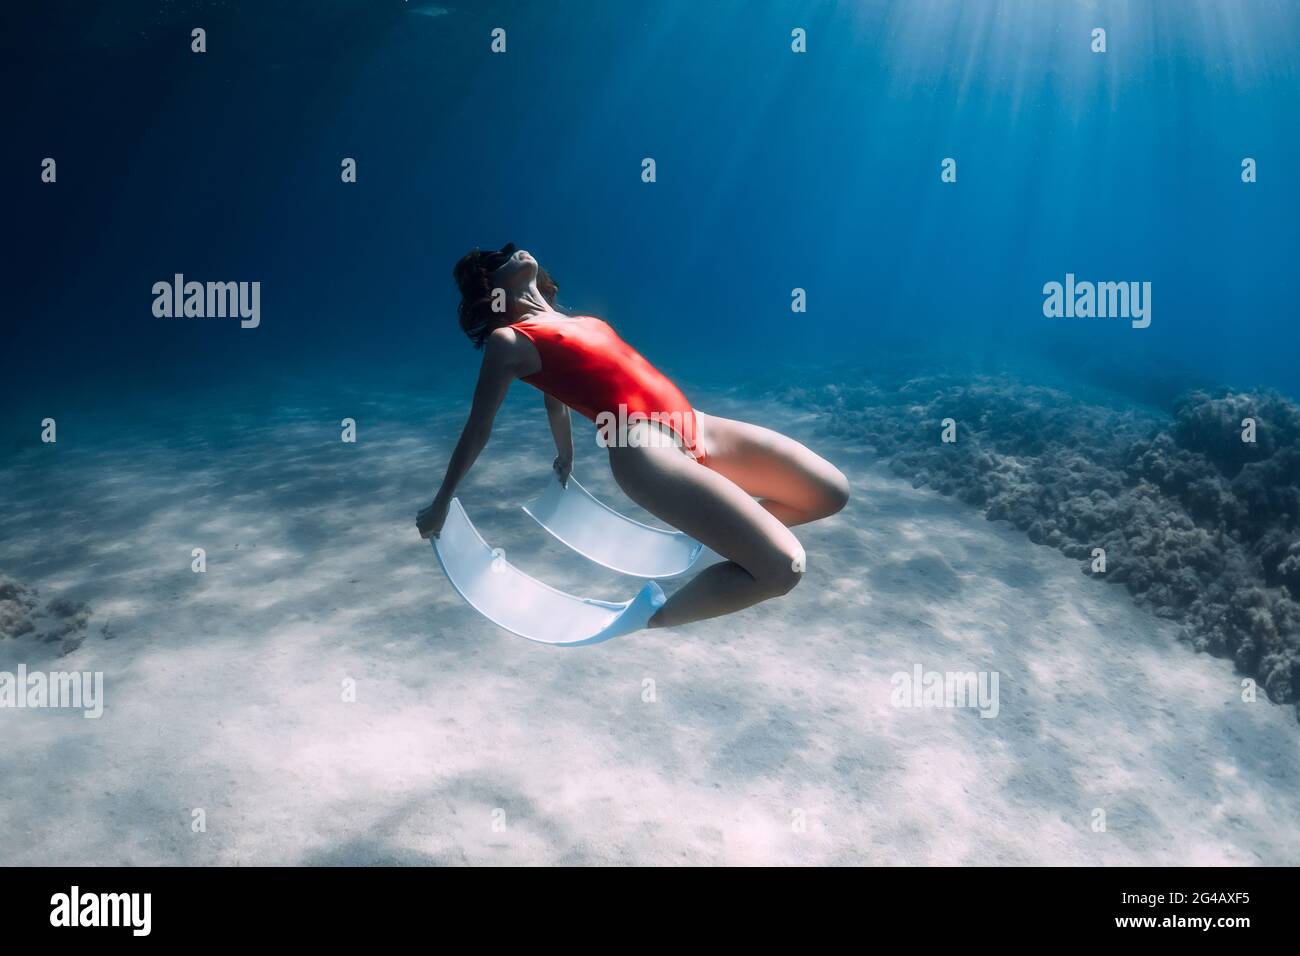 Freediver woman in swimsuit with white fins posing underwater over sand in transparent ocean. Stock Photo